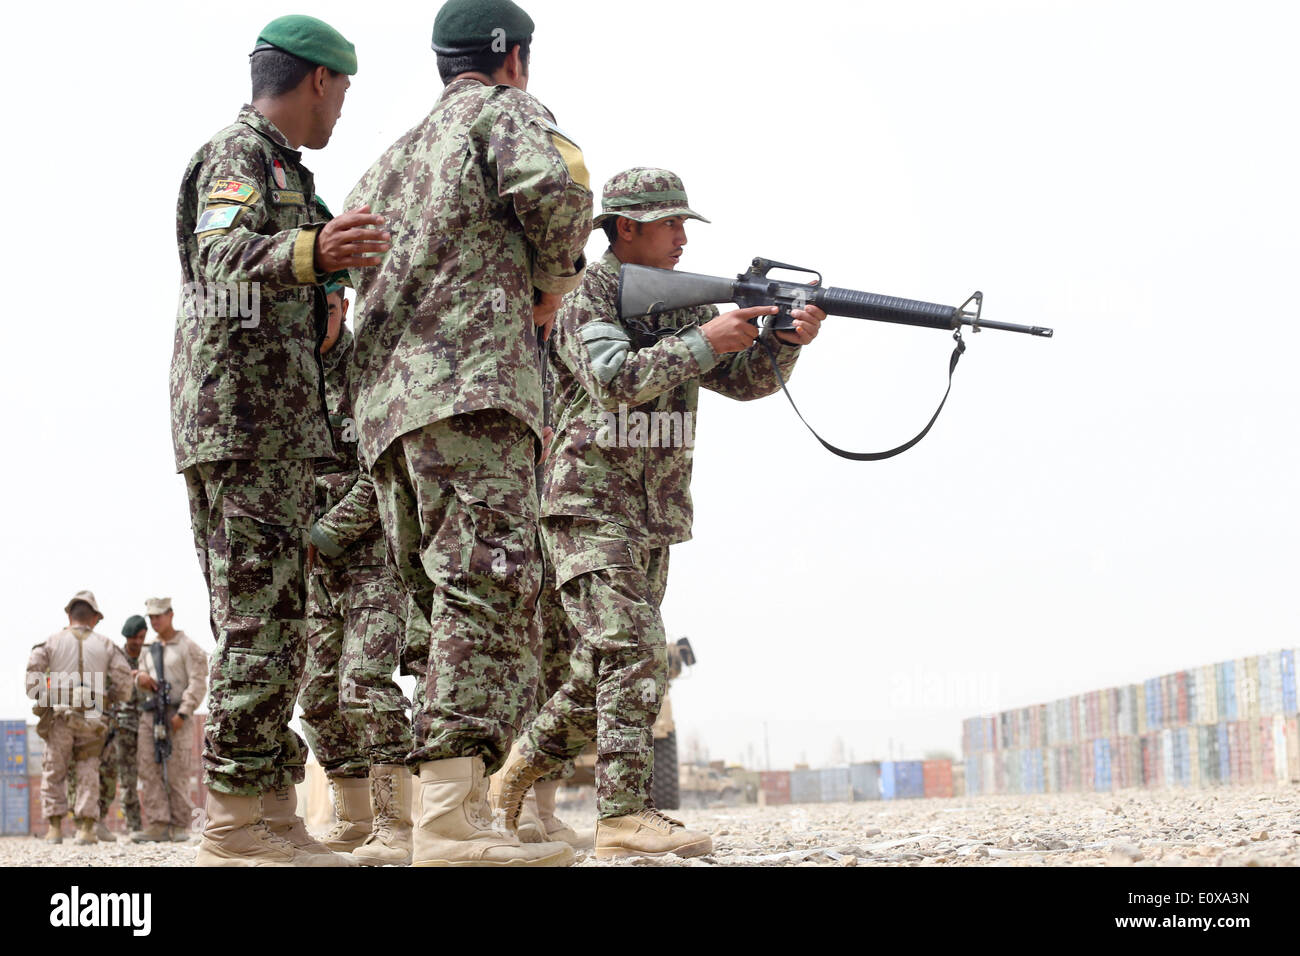 An Afghan instructor provides instruction to soldier with the 4th TOLAY, 215th Corps, Afghanistan National Army during a tactical procedure exercise May 17, 2014 at Camp Shorabak, Helmand province, Afghanistan. Stock Photo